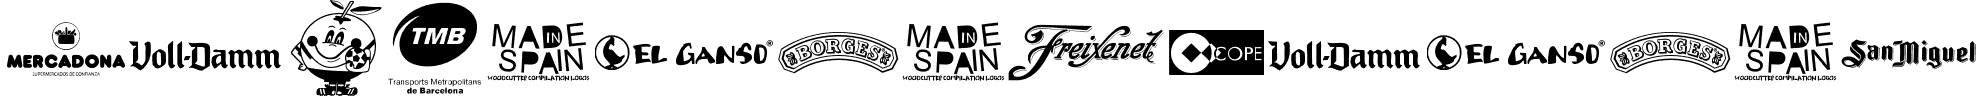 made in spain 2 font - MADE IN SPAIN 2.ttf